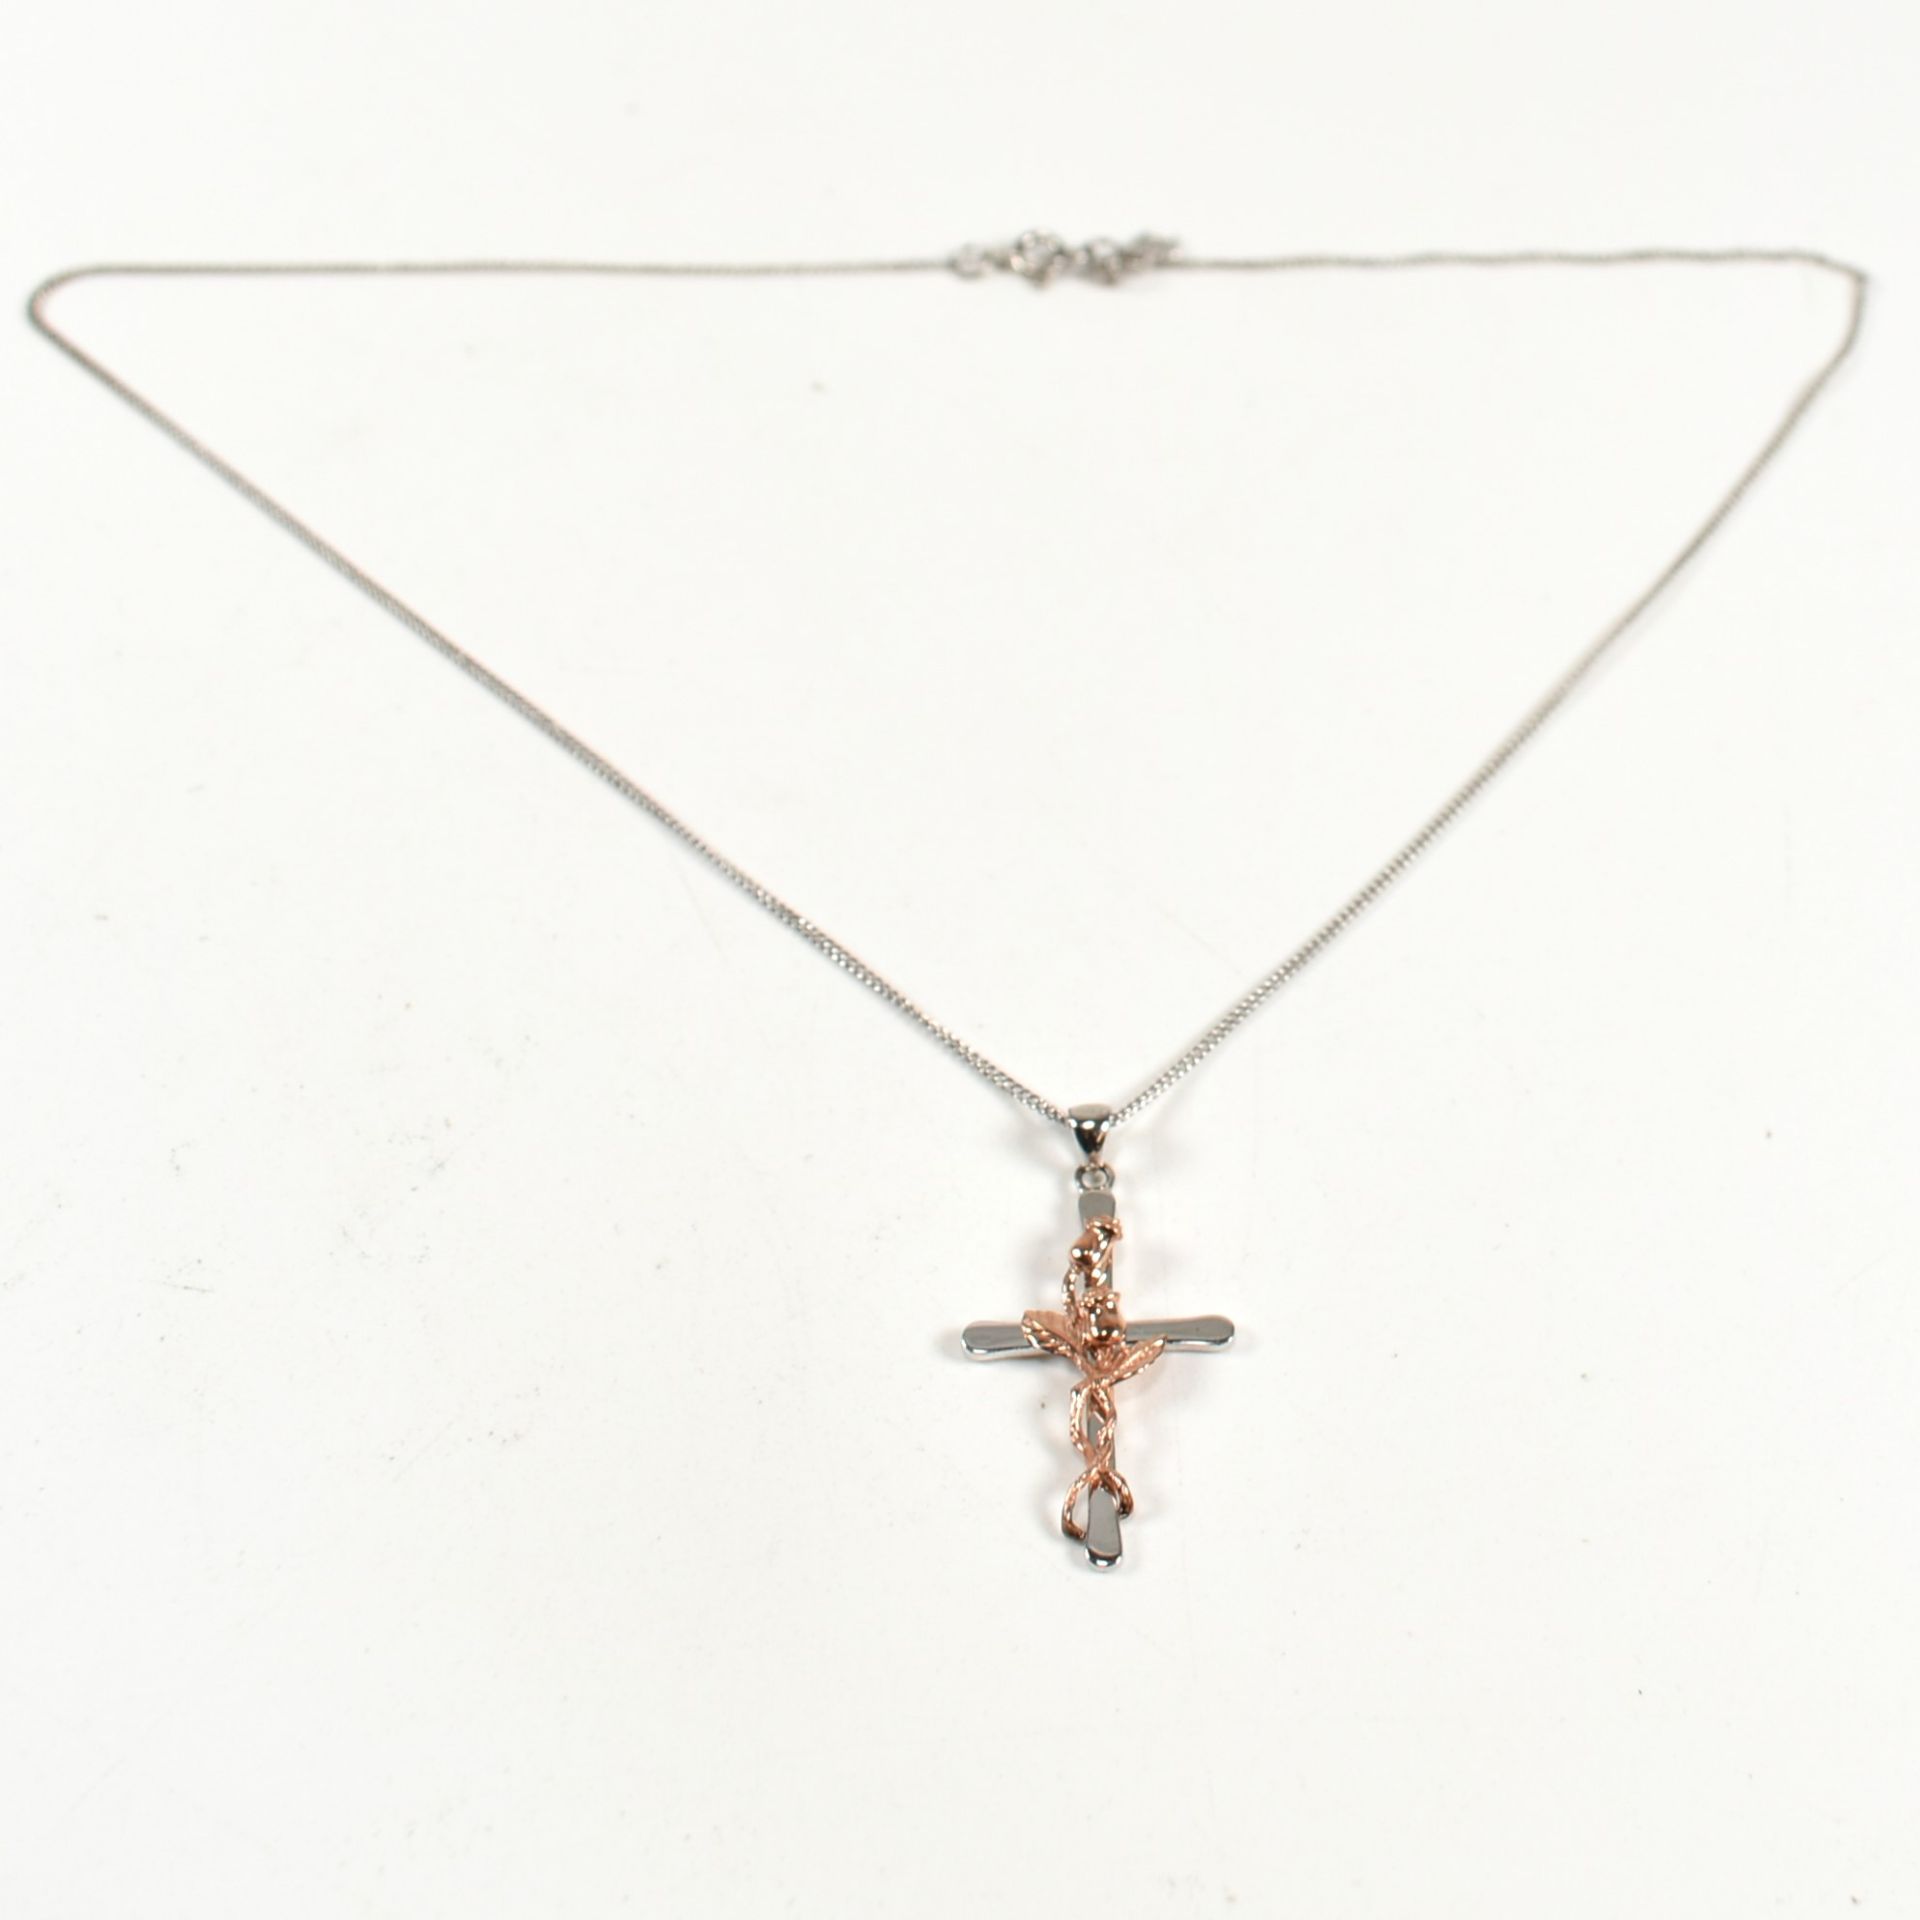 HALLMARKED SILVER & ROSE GOLD CLOGAU CROSS PENDANT NECKLACE - Image 3 of 5